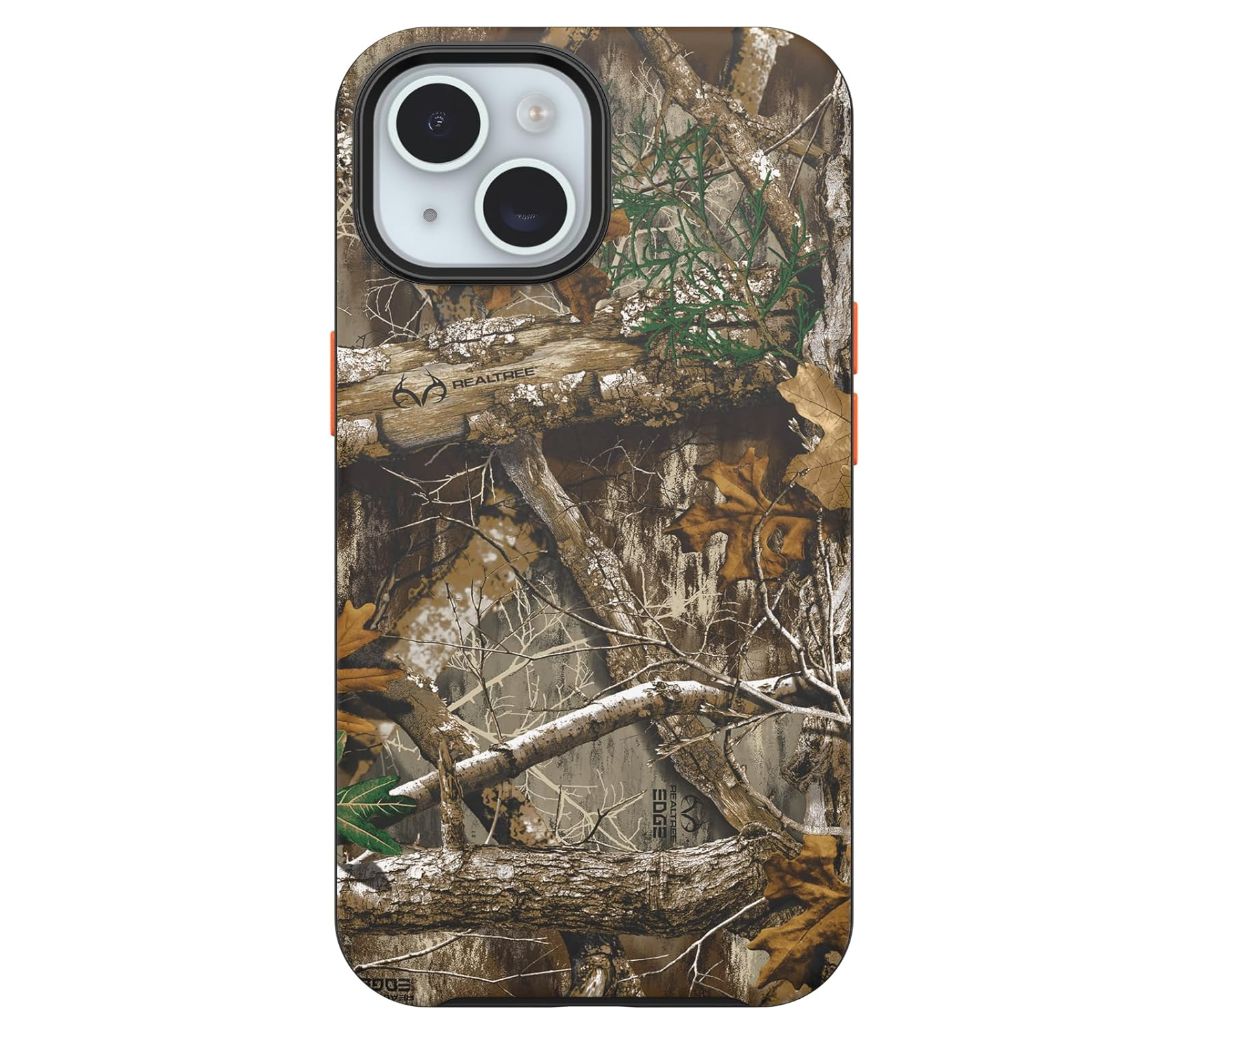 An OtterBox phone case with an outdoorsy print installed on a phone